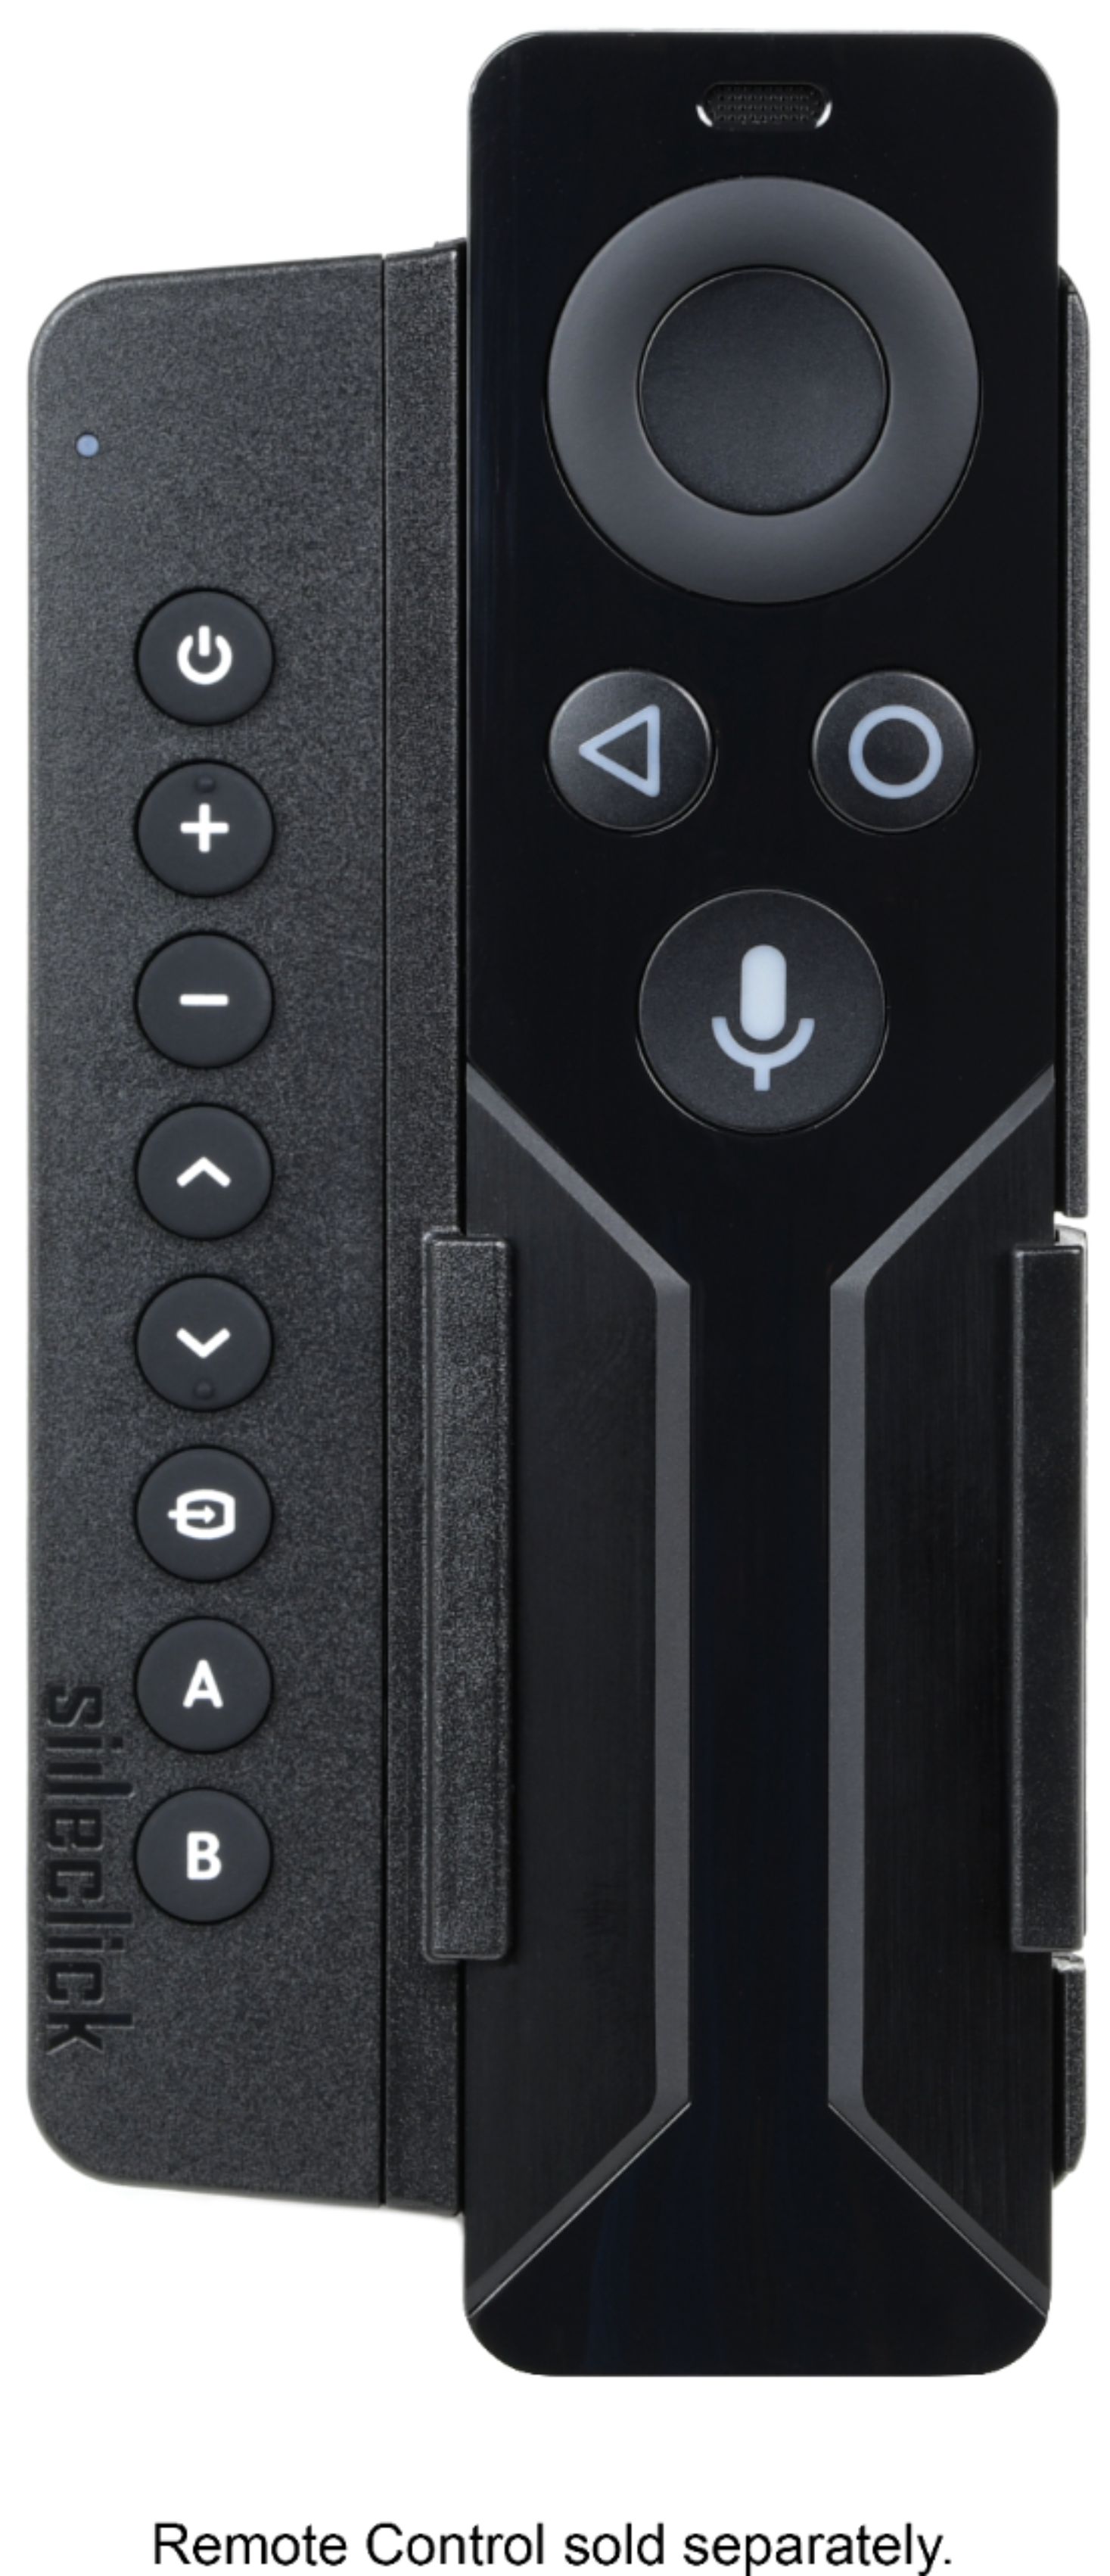 NVIDIA SHIELD Remote; Voice Search, Motion-Activated, Backlit Buttons,  Customizable Menu Buttons, and IR Blaster to Control your TV